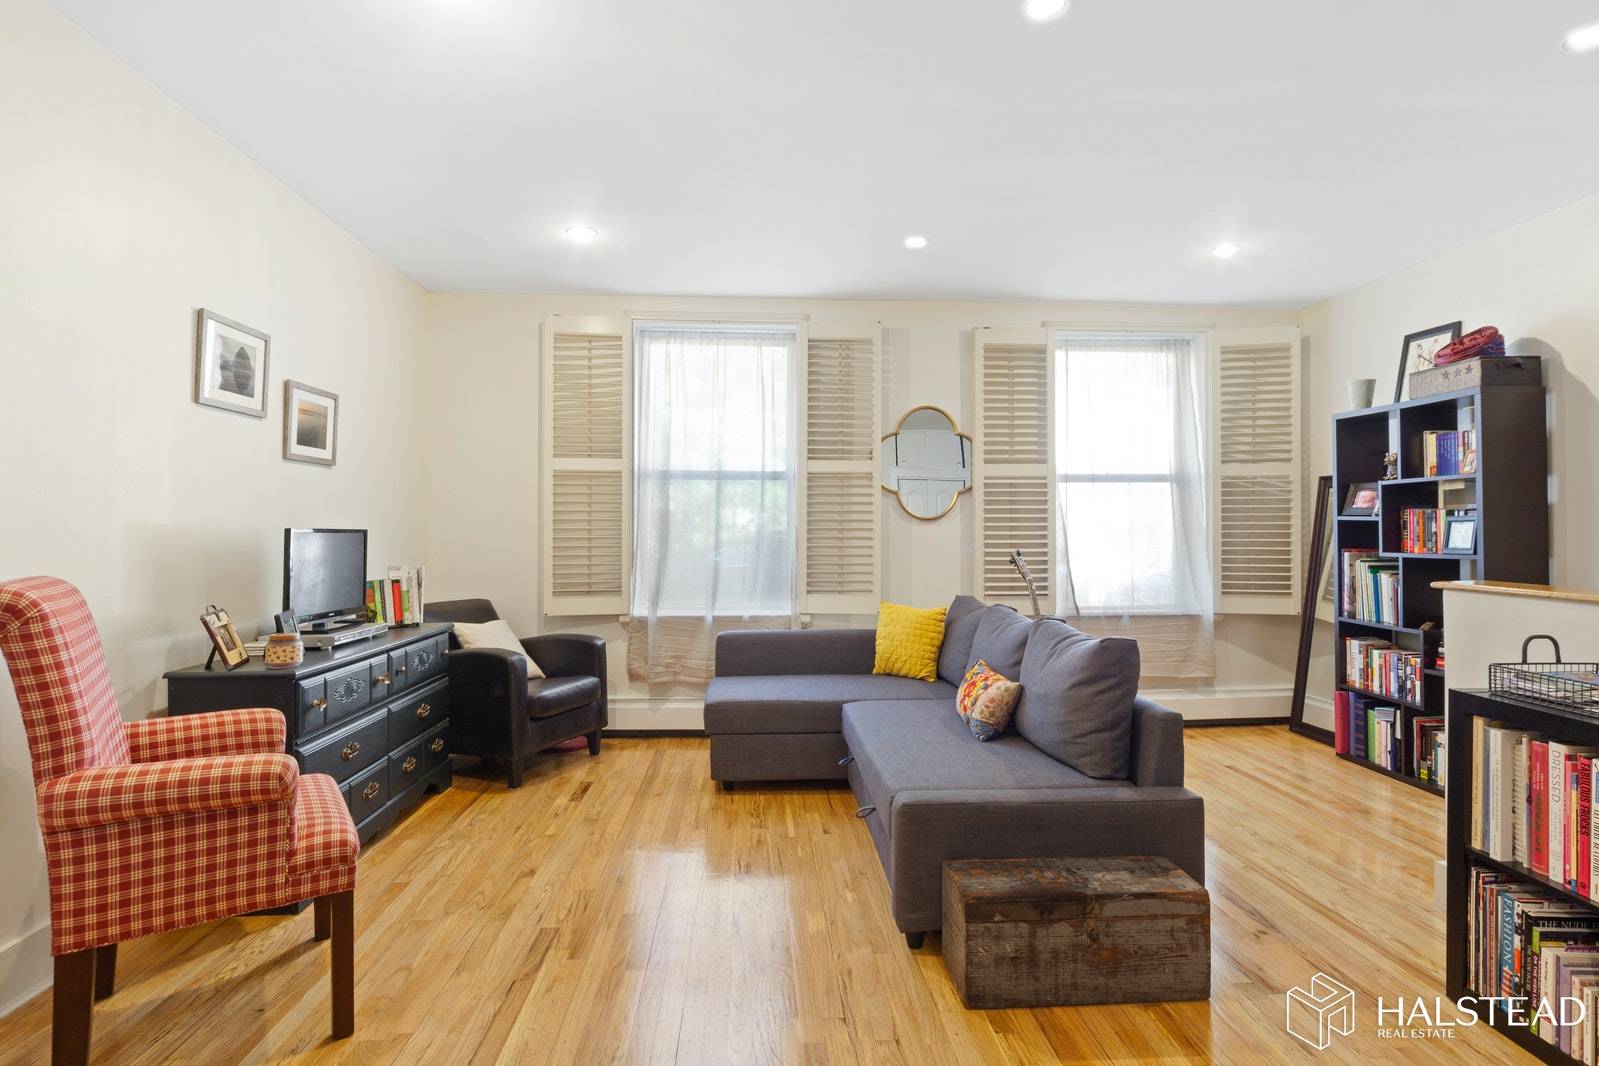 Located in thriving Ditmas Park near Flatbush, this fabulous 1240 square foot duplex functions nicely as a two bedroom.